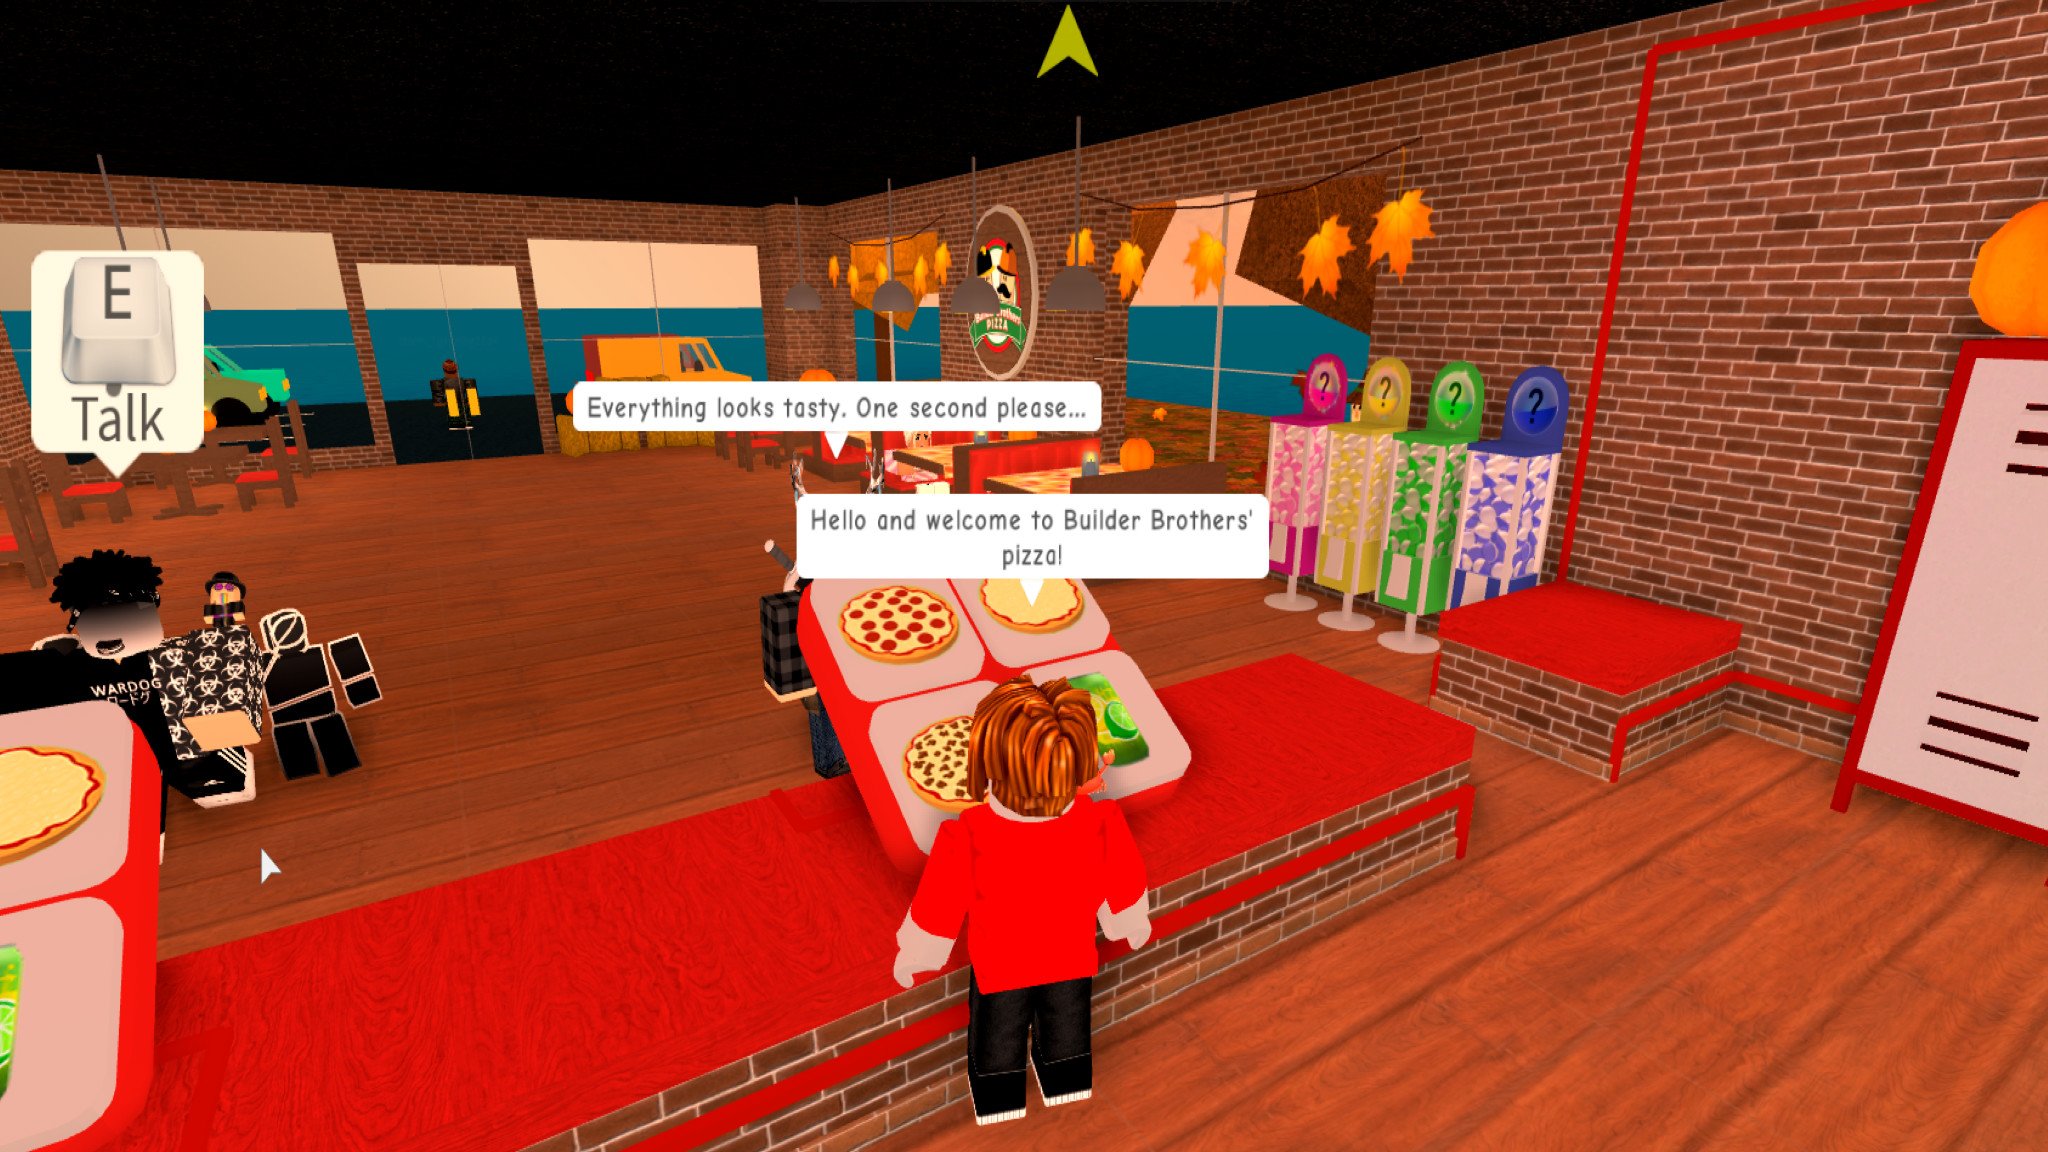 How Do You Make A Shirt In Roblox Android Central - roblox event page 2019 pizza party